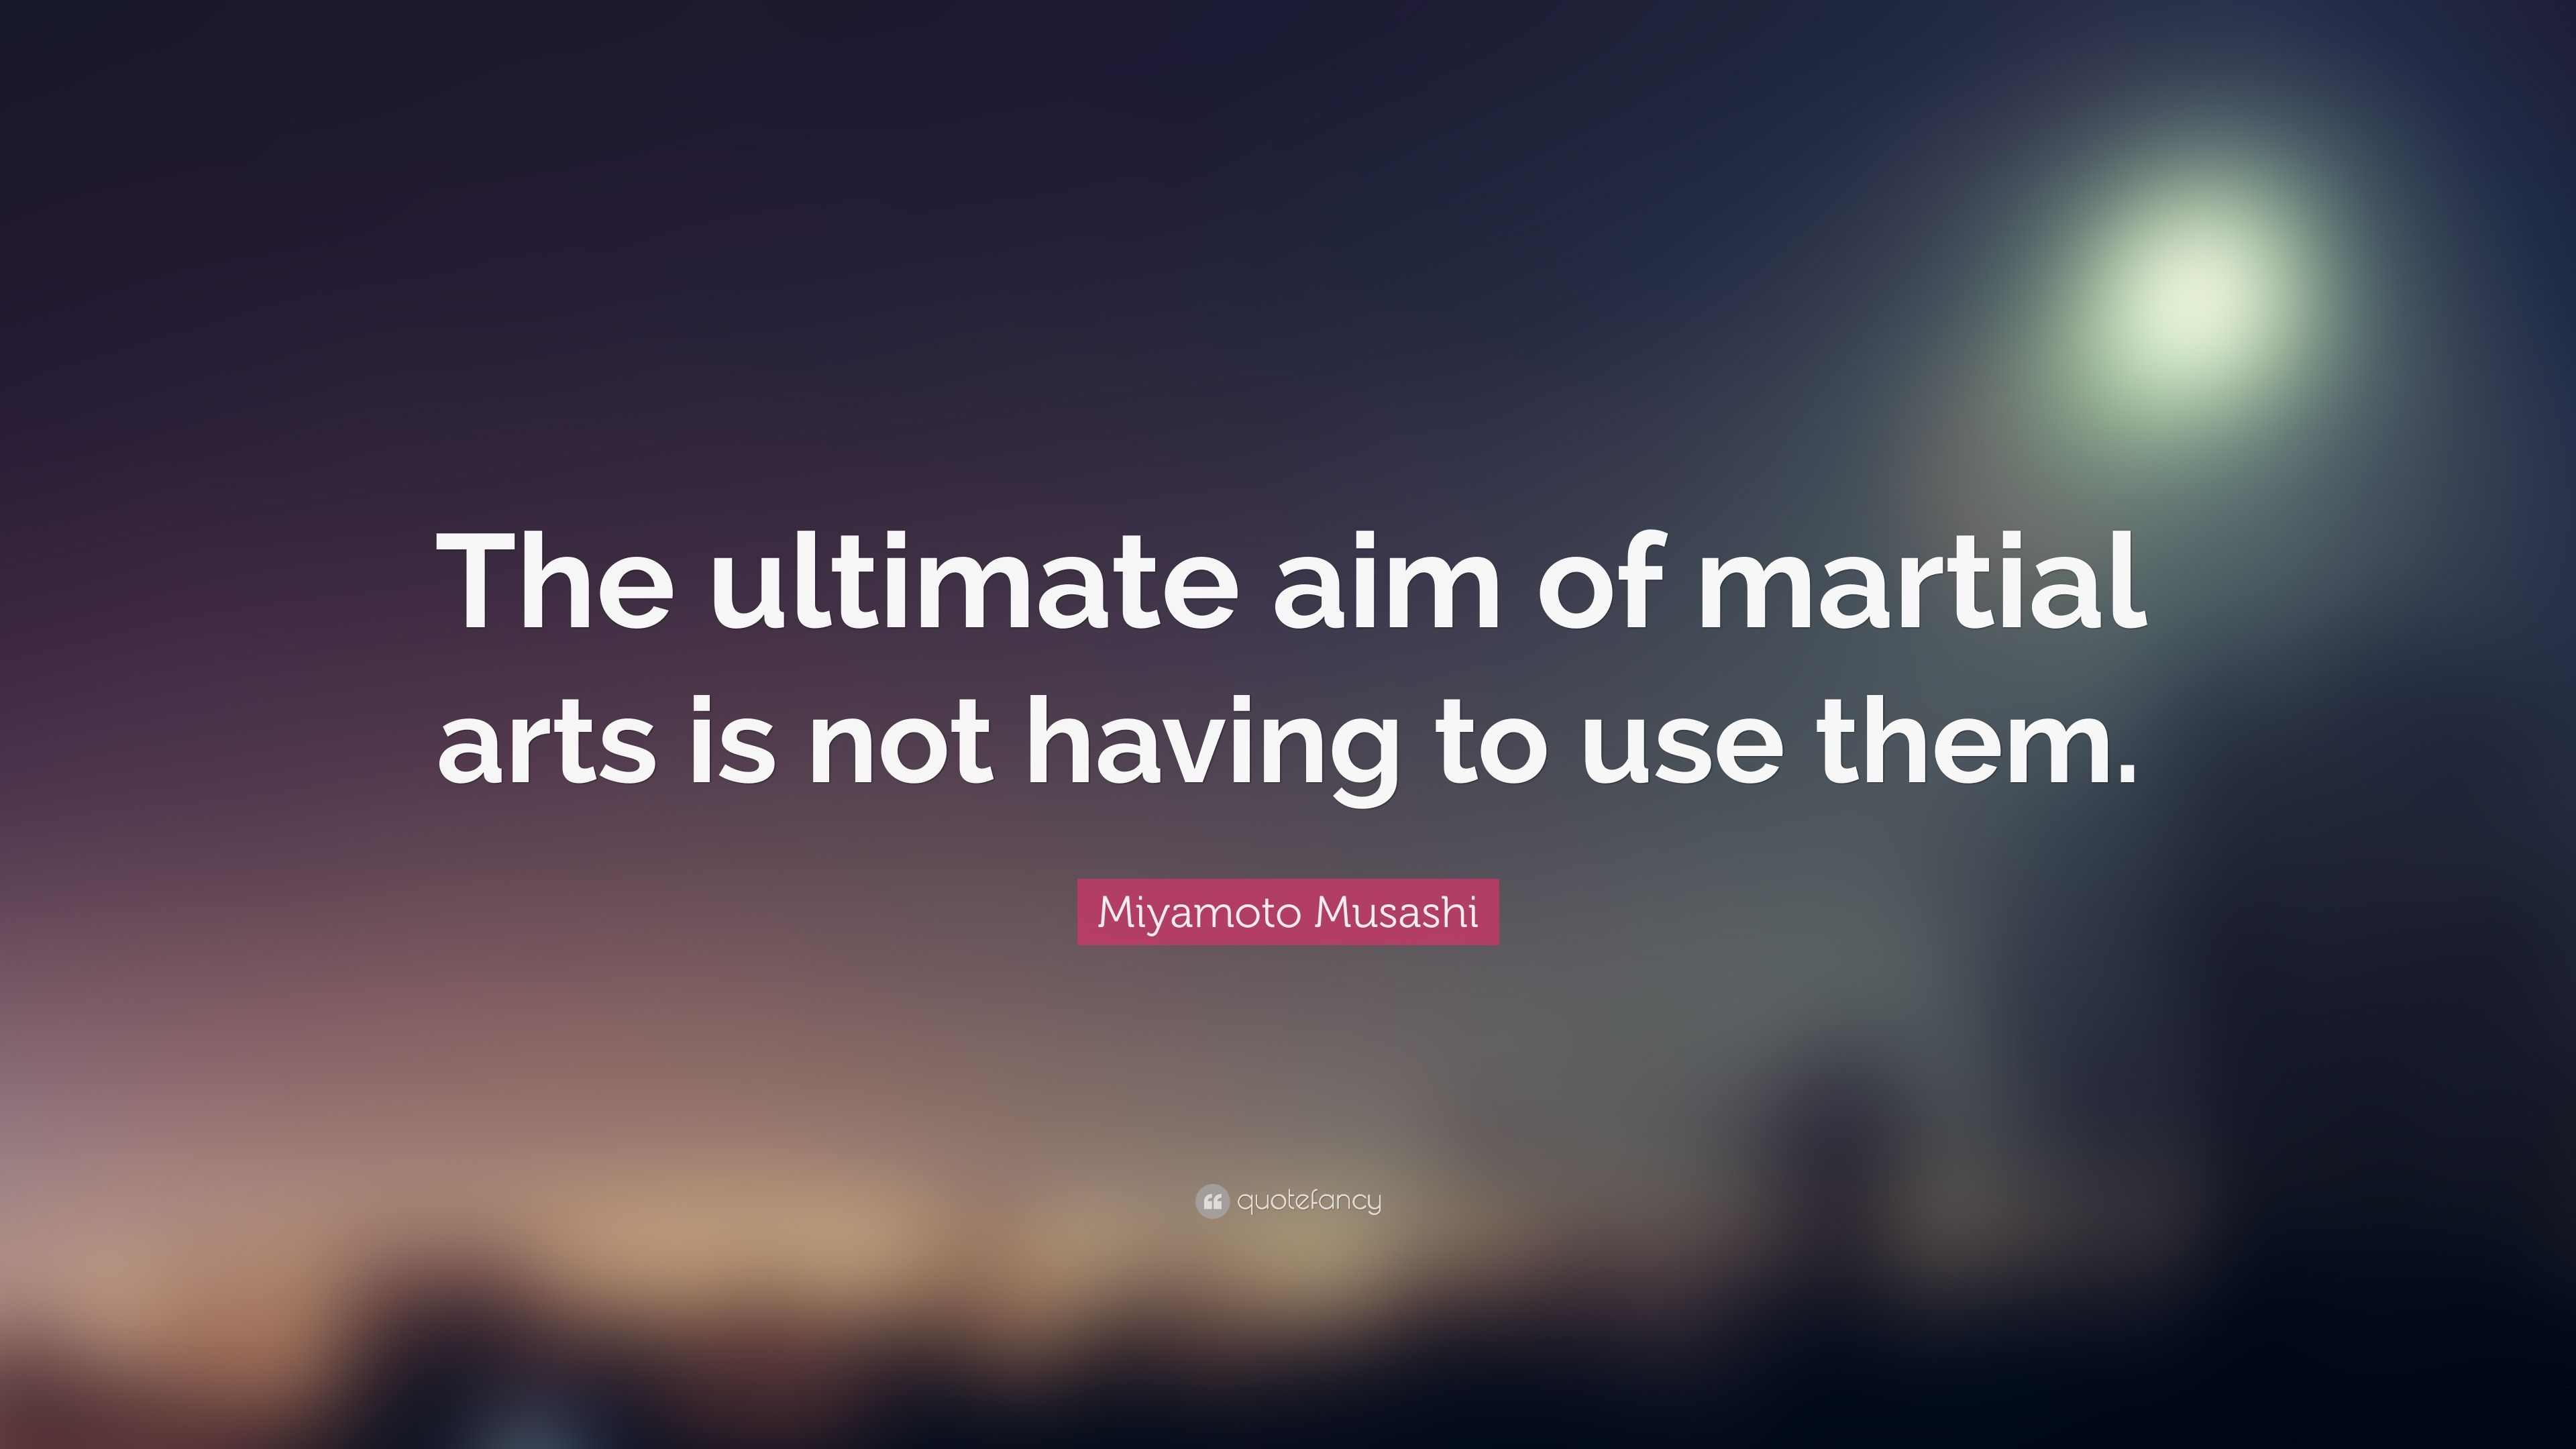 Miyamoto Musashi Quote: “The ultimate aim of martial arts is not ...